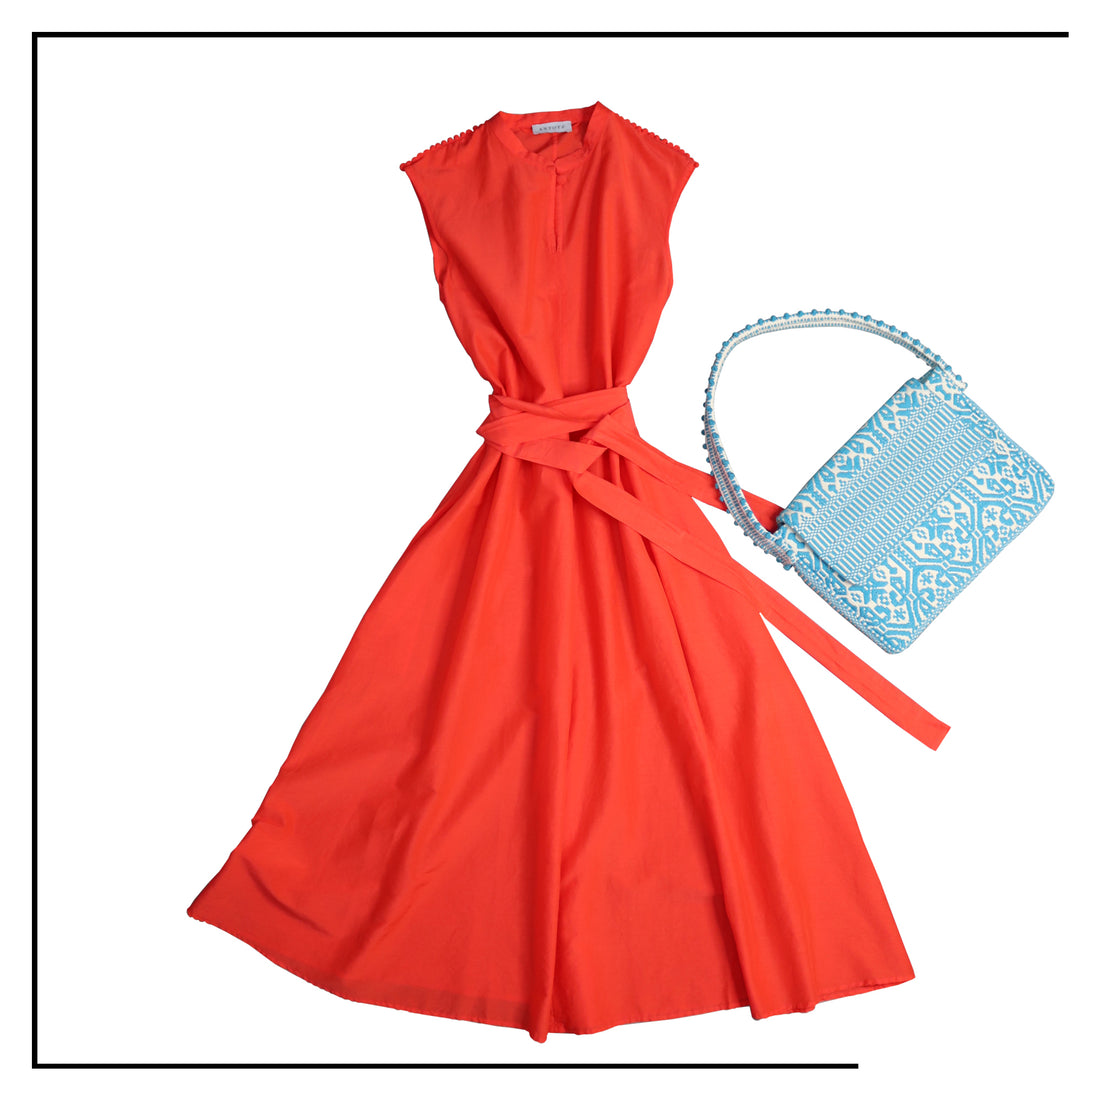 red dress with turquoise bag #ethicalbrands #ecoliving  #ecofashion #ecostyle #ethicalhandbags #handbags #sustainas brand. Stylish clothes and Eco-Friendly with recycled yarns #luxury #ecoconcious #sustainablestblelifestyle #ethicalfashion #sustainability